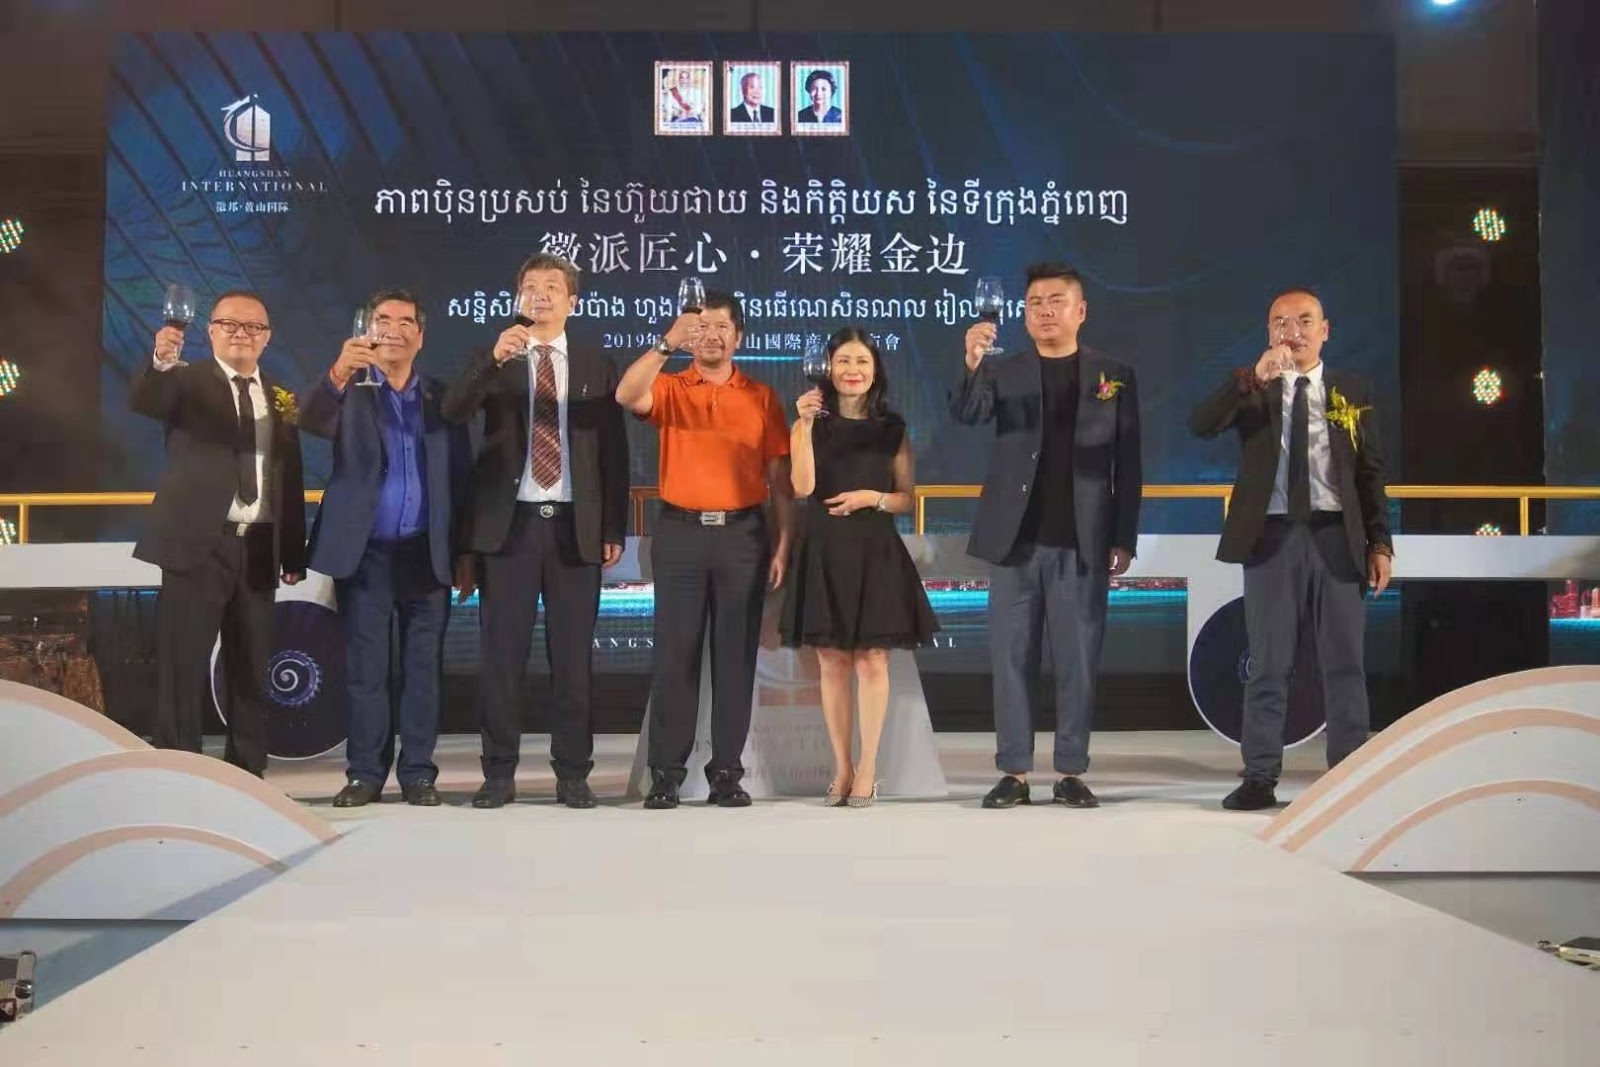 Guests of honour give a toast at the launching of Huibang Huangshan International earlier this month in Phnom Penh.